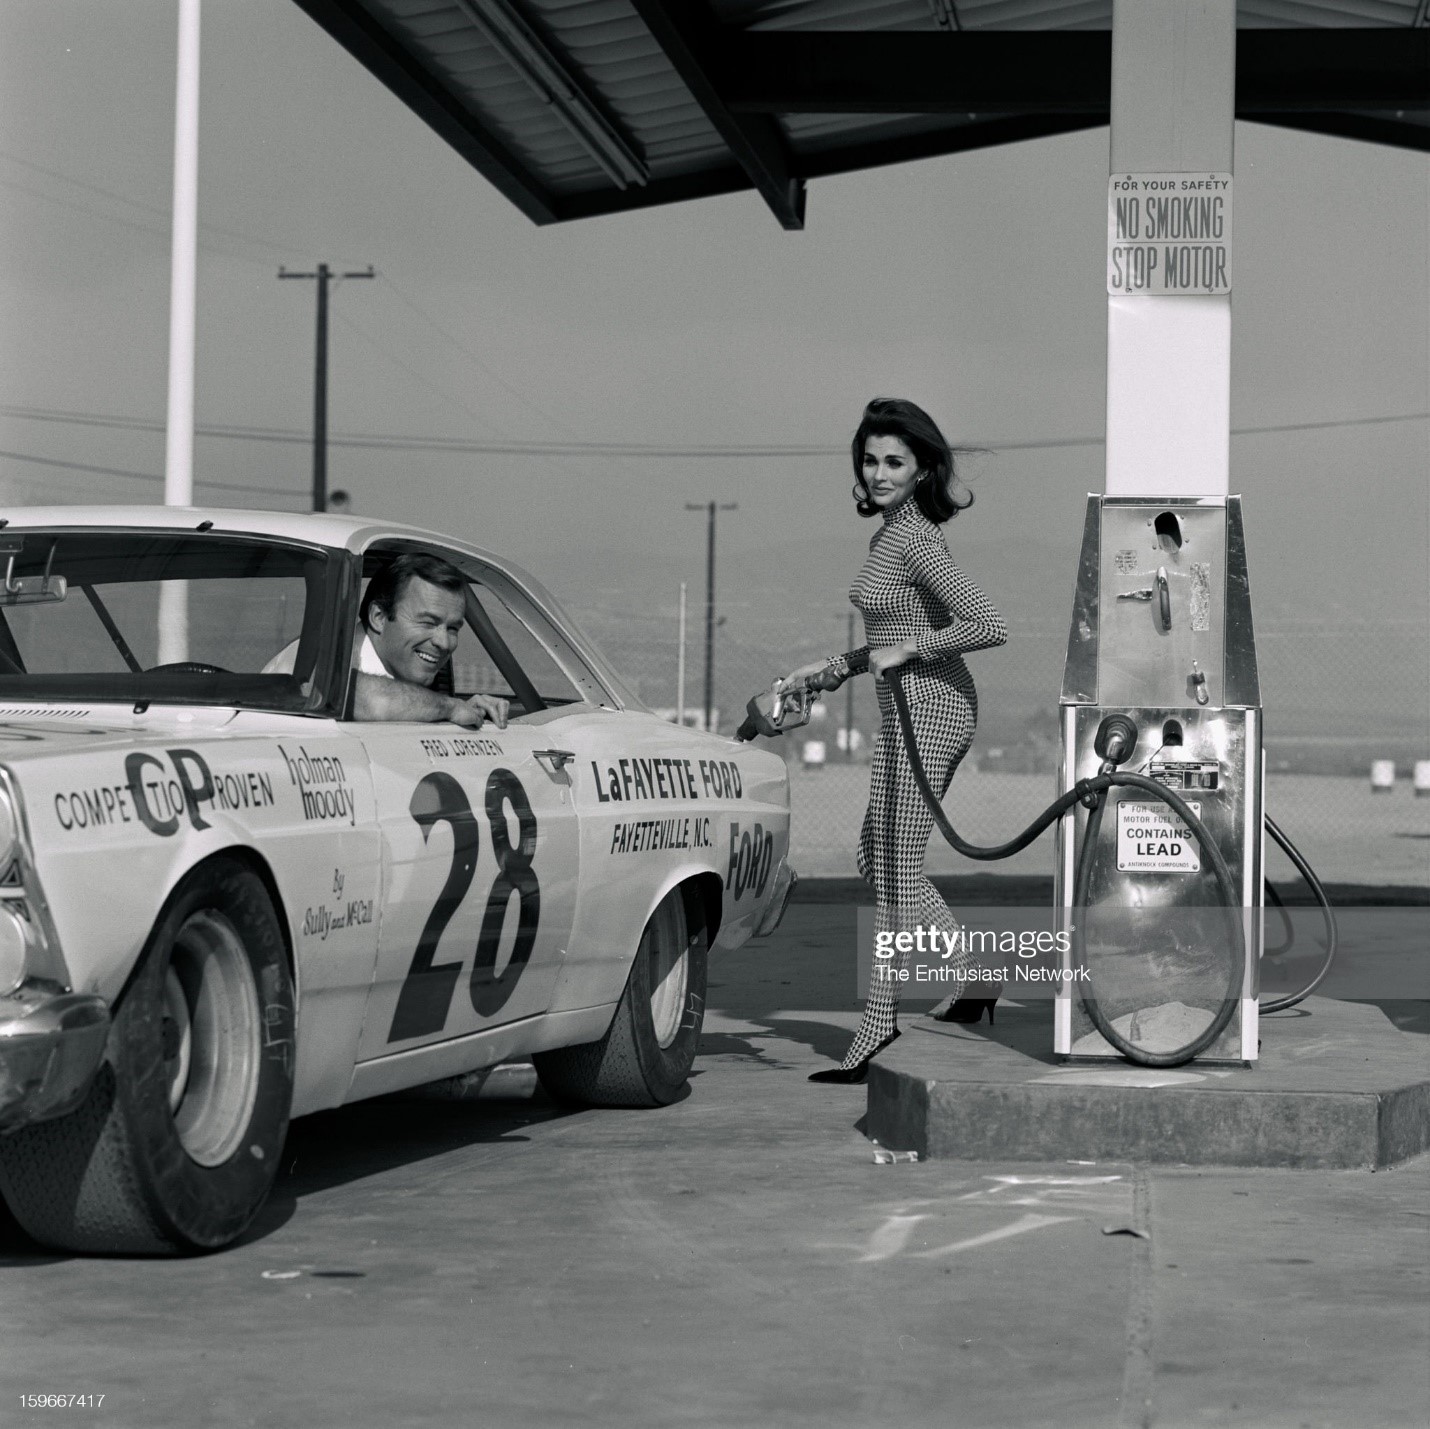 United States, January 05, 1967, Queen Motor Trend 500. Race queen and actress Lara Lindsay poses for a shot filling up Fred Lorenzen's car. Lorenzen was in the race lead before the race was postponed. 